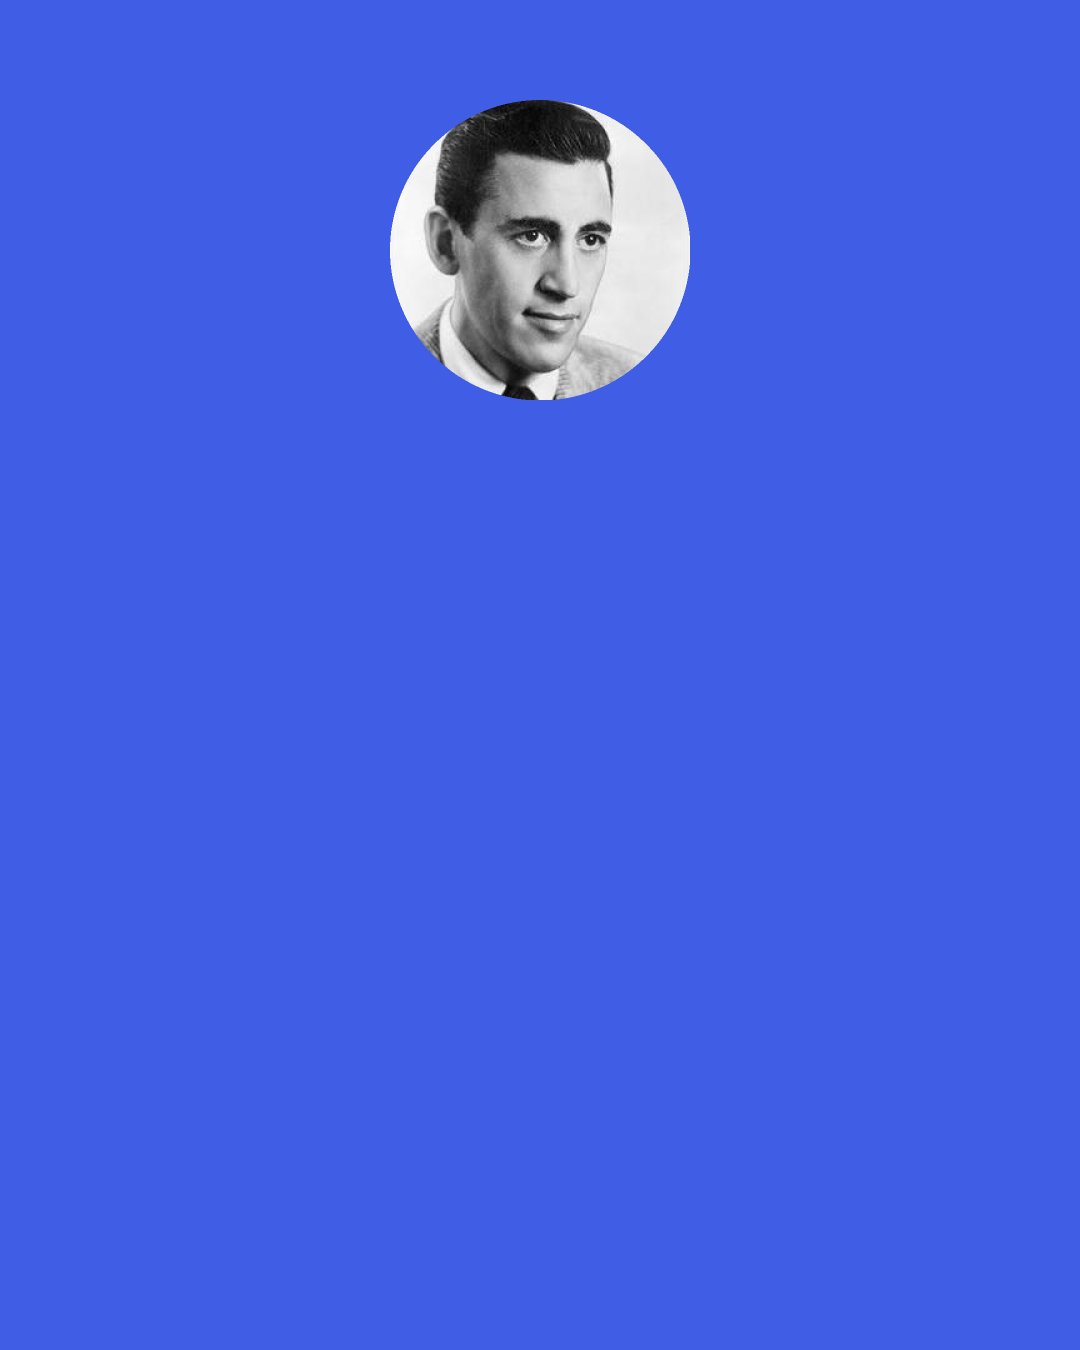 J. D. Salinger: I'm beginning to feel that no author has the right to tear his characters apart if he doesn't know how, or feel that he knows how (poor sucker) to put them together again. I'm tired—my God, so tired—of leaving them all broken on the page with just 'The End' written underneath.